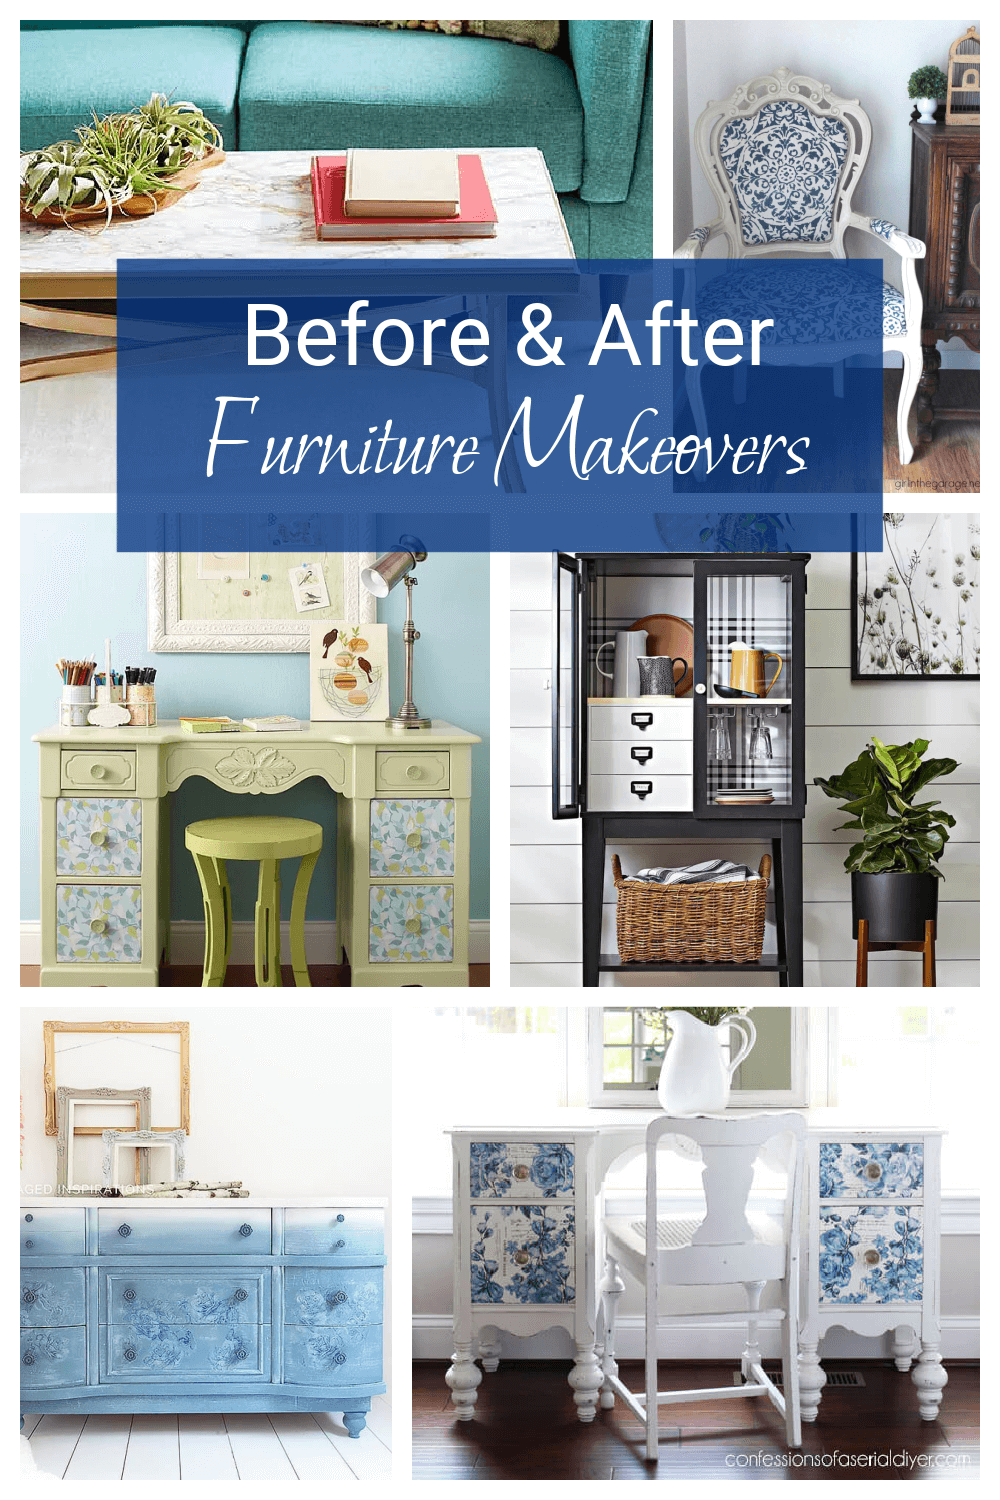 Before & After Furniture Makeovers